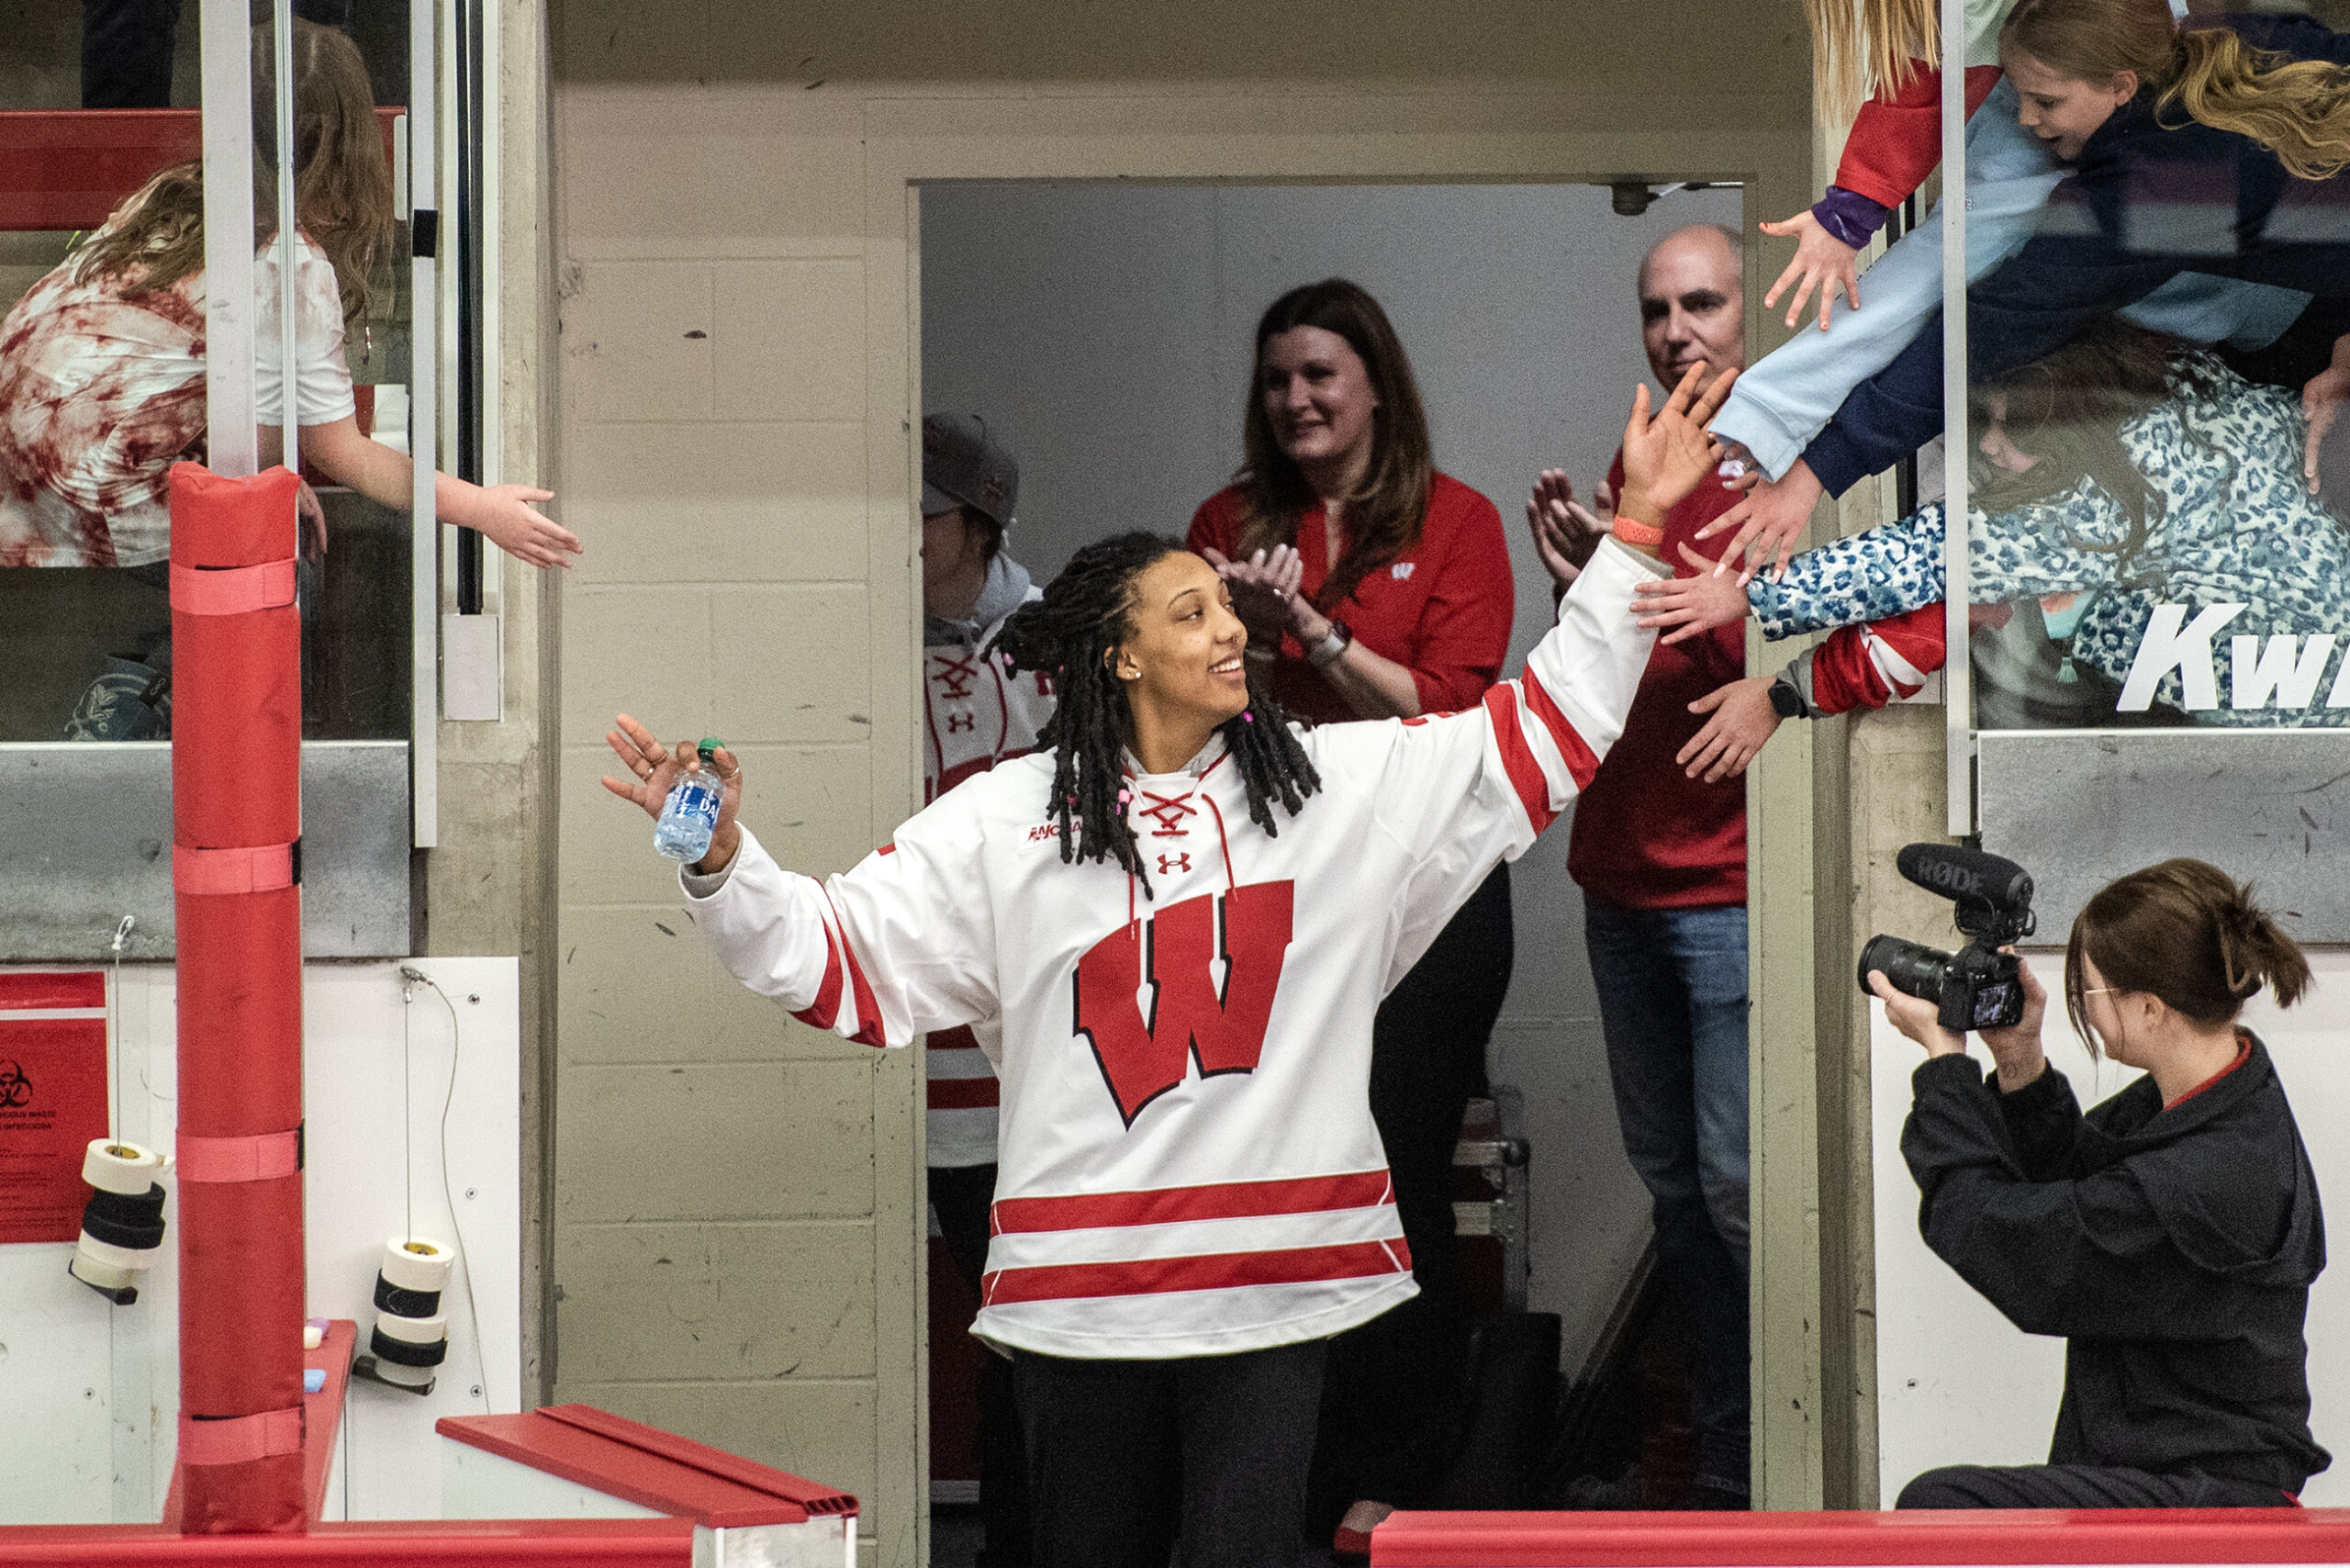 A player in a Badgers jersey smiles as she high fives fans.